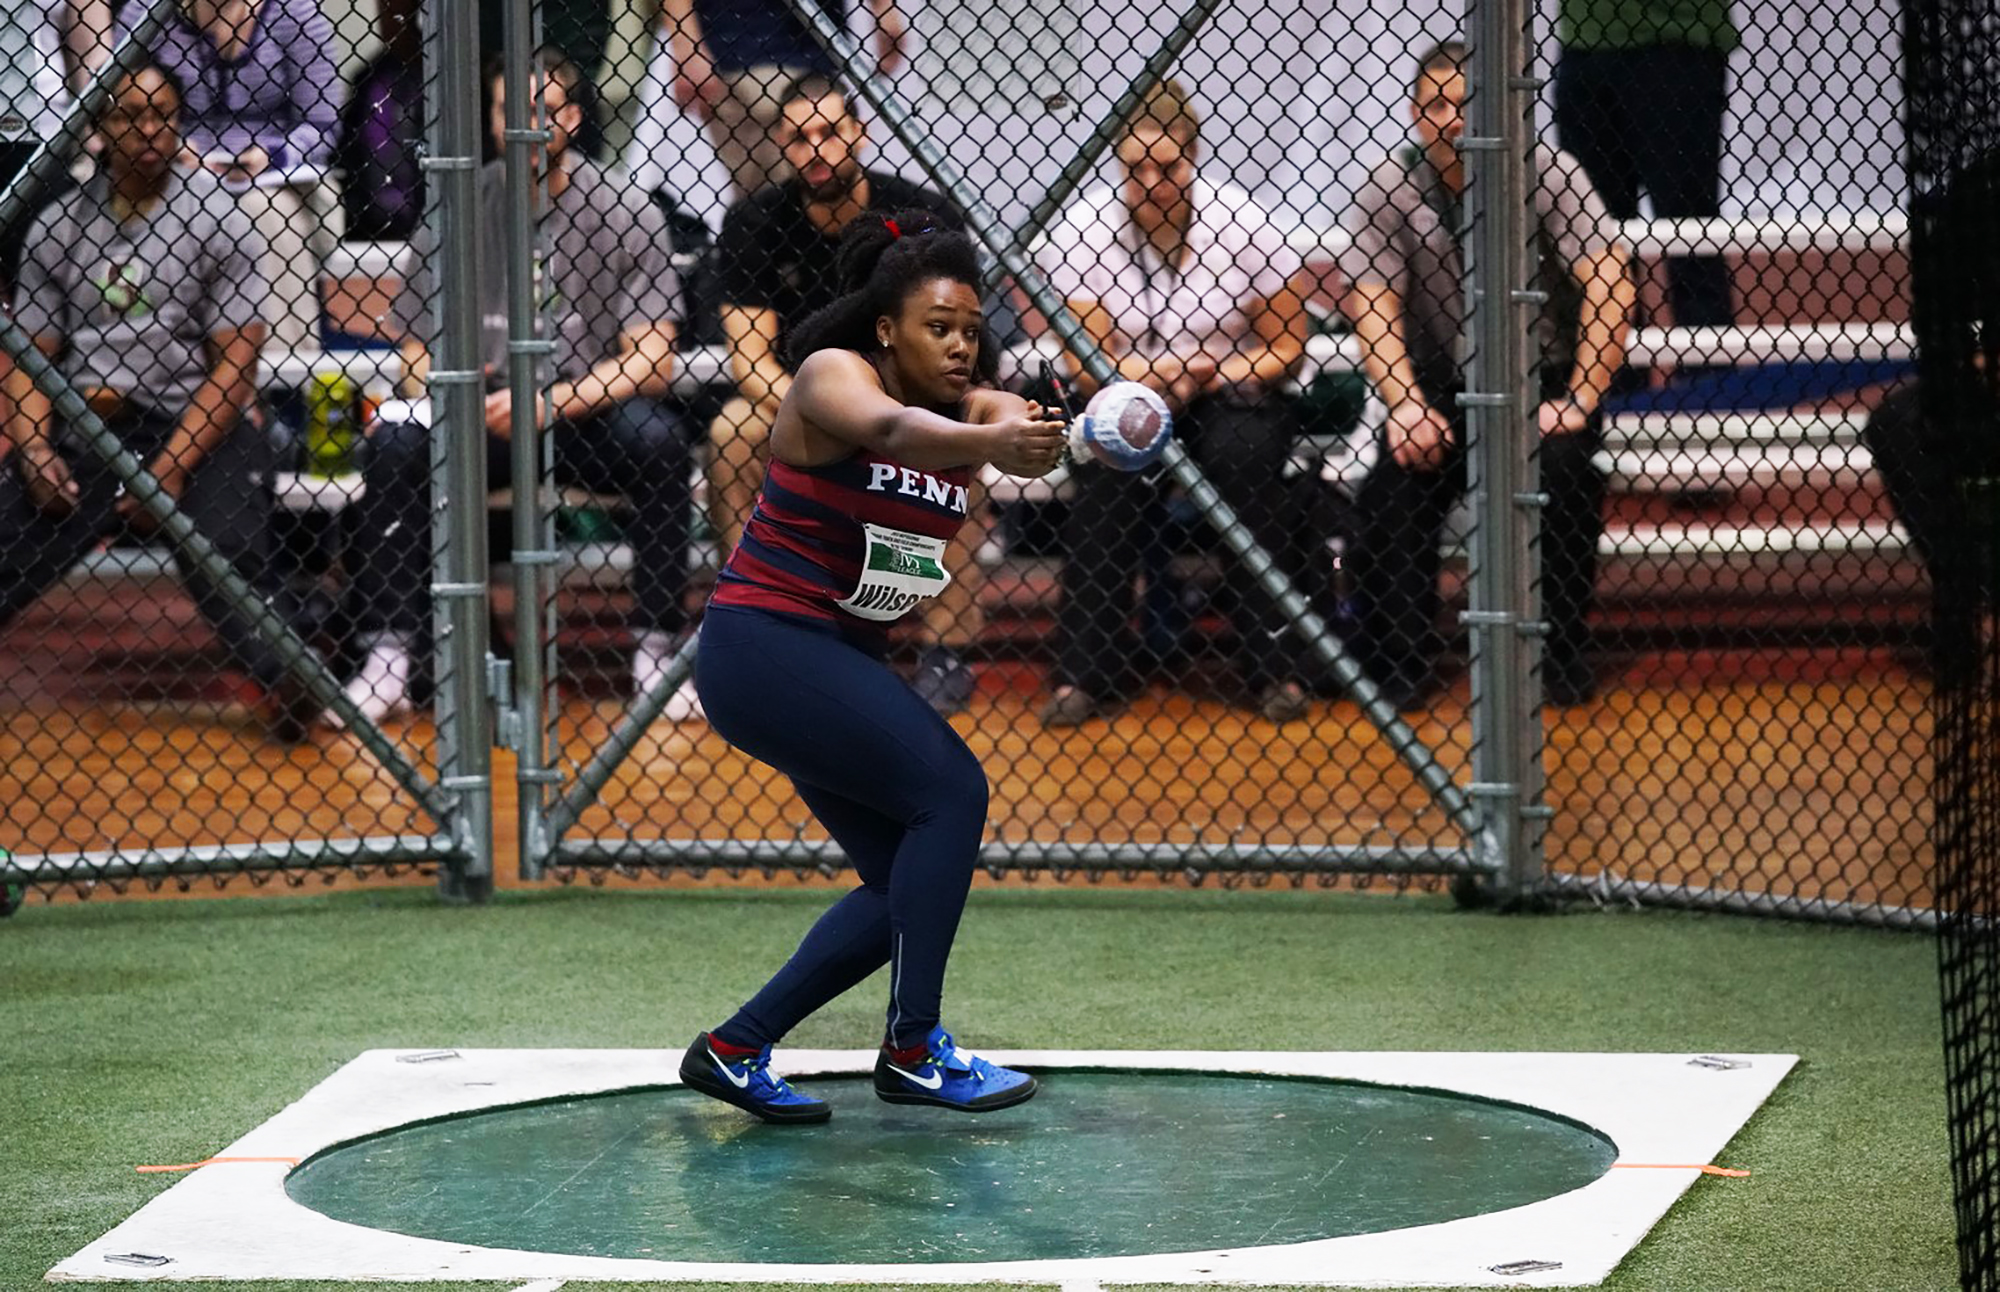 Rachel Lee Wilson competes in the hammer throw during a meet.